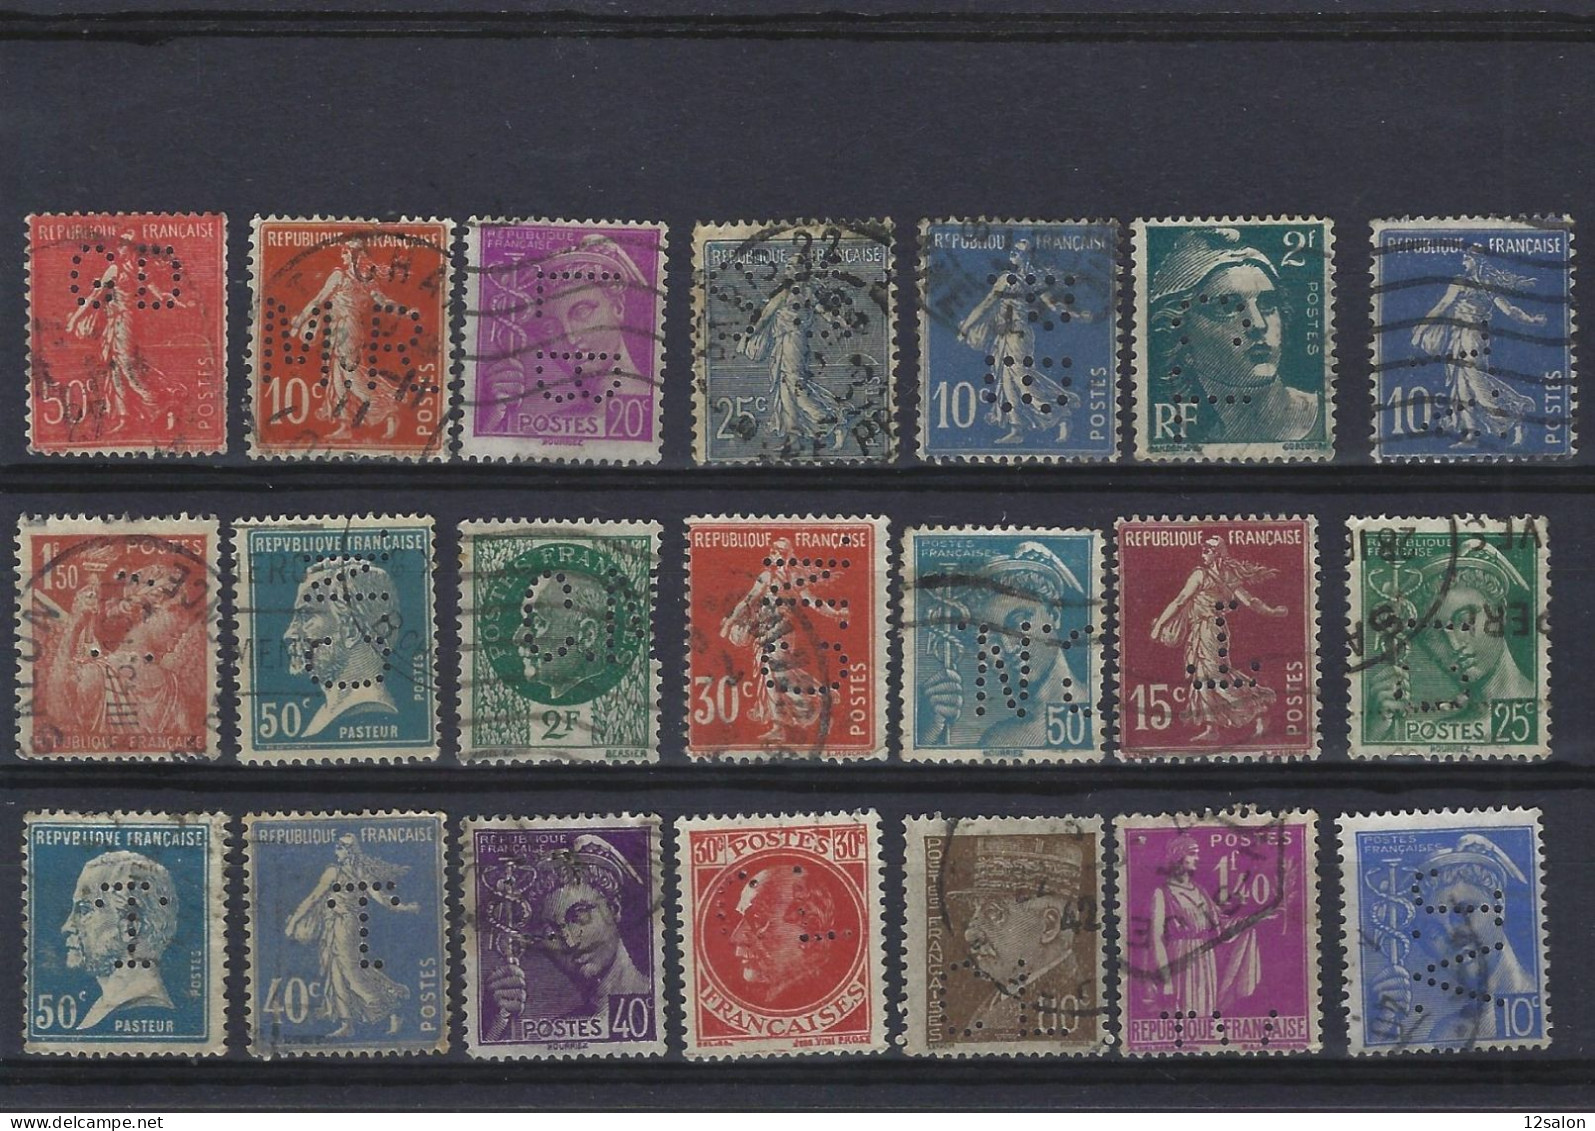 FRANCE TIMBRE LOT 2 PERFORE PERFORES PERFIN PERFINS PERFO PERFORATION PERFORIERT - Usados